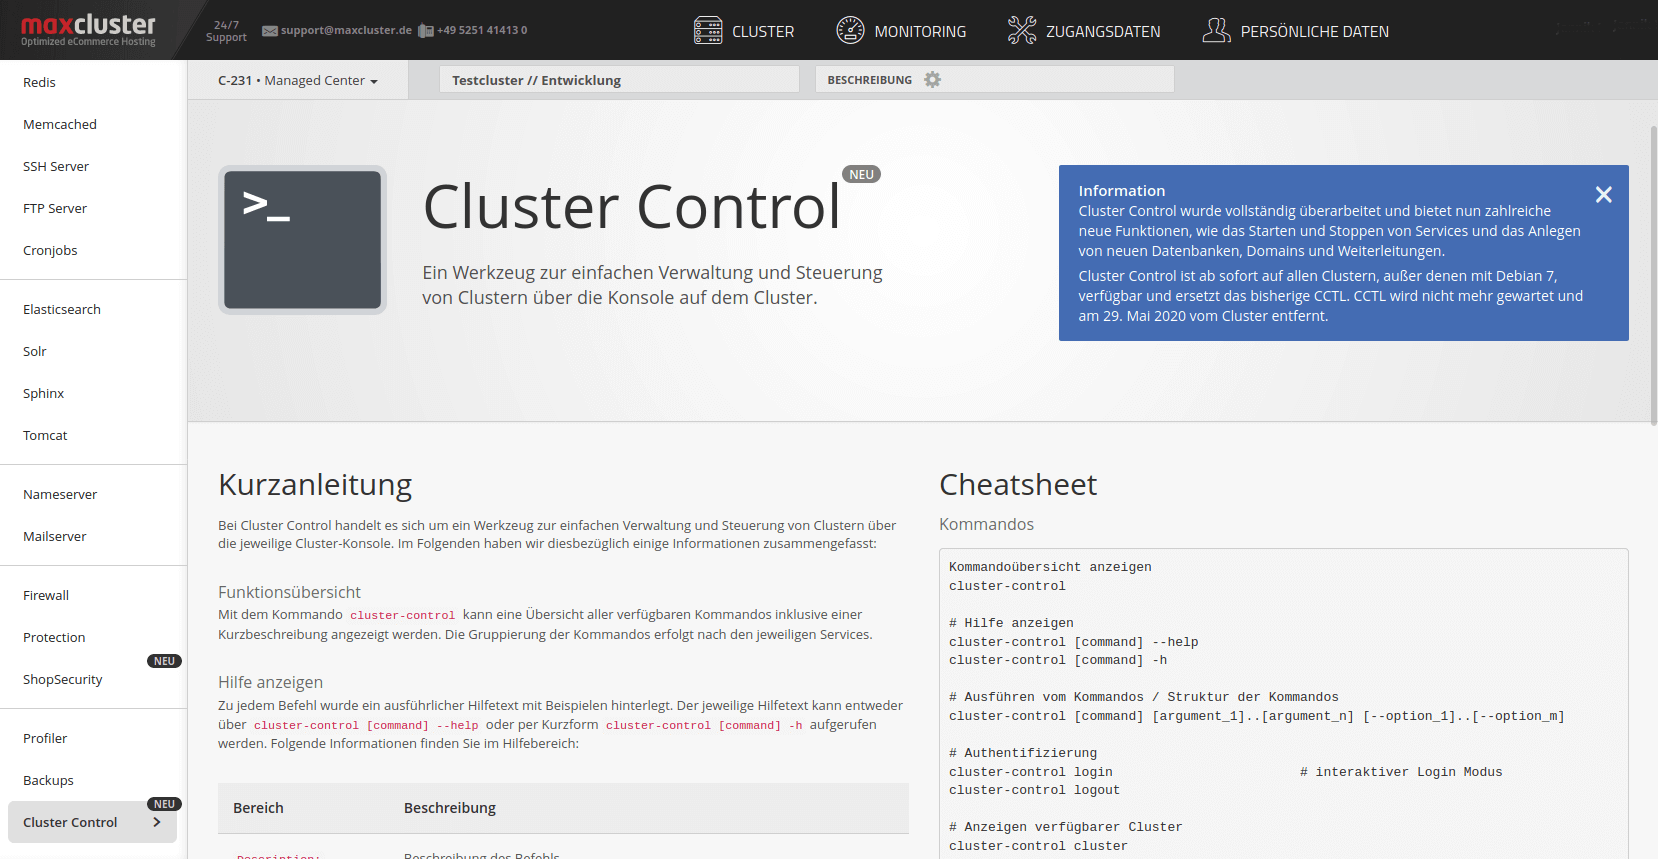 Cluster Control im maxcluster Managed Center